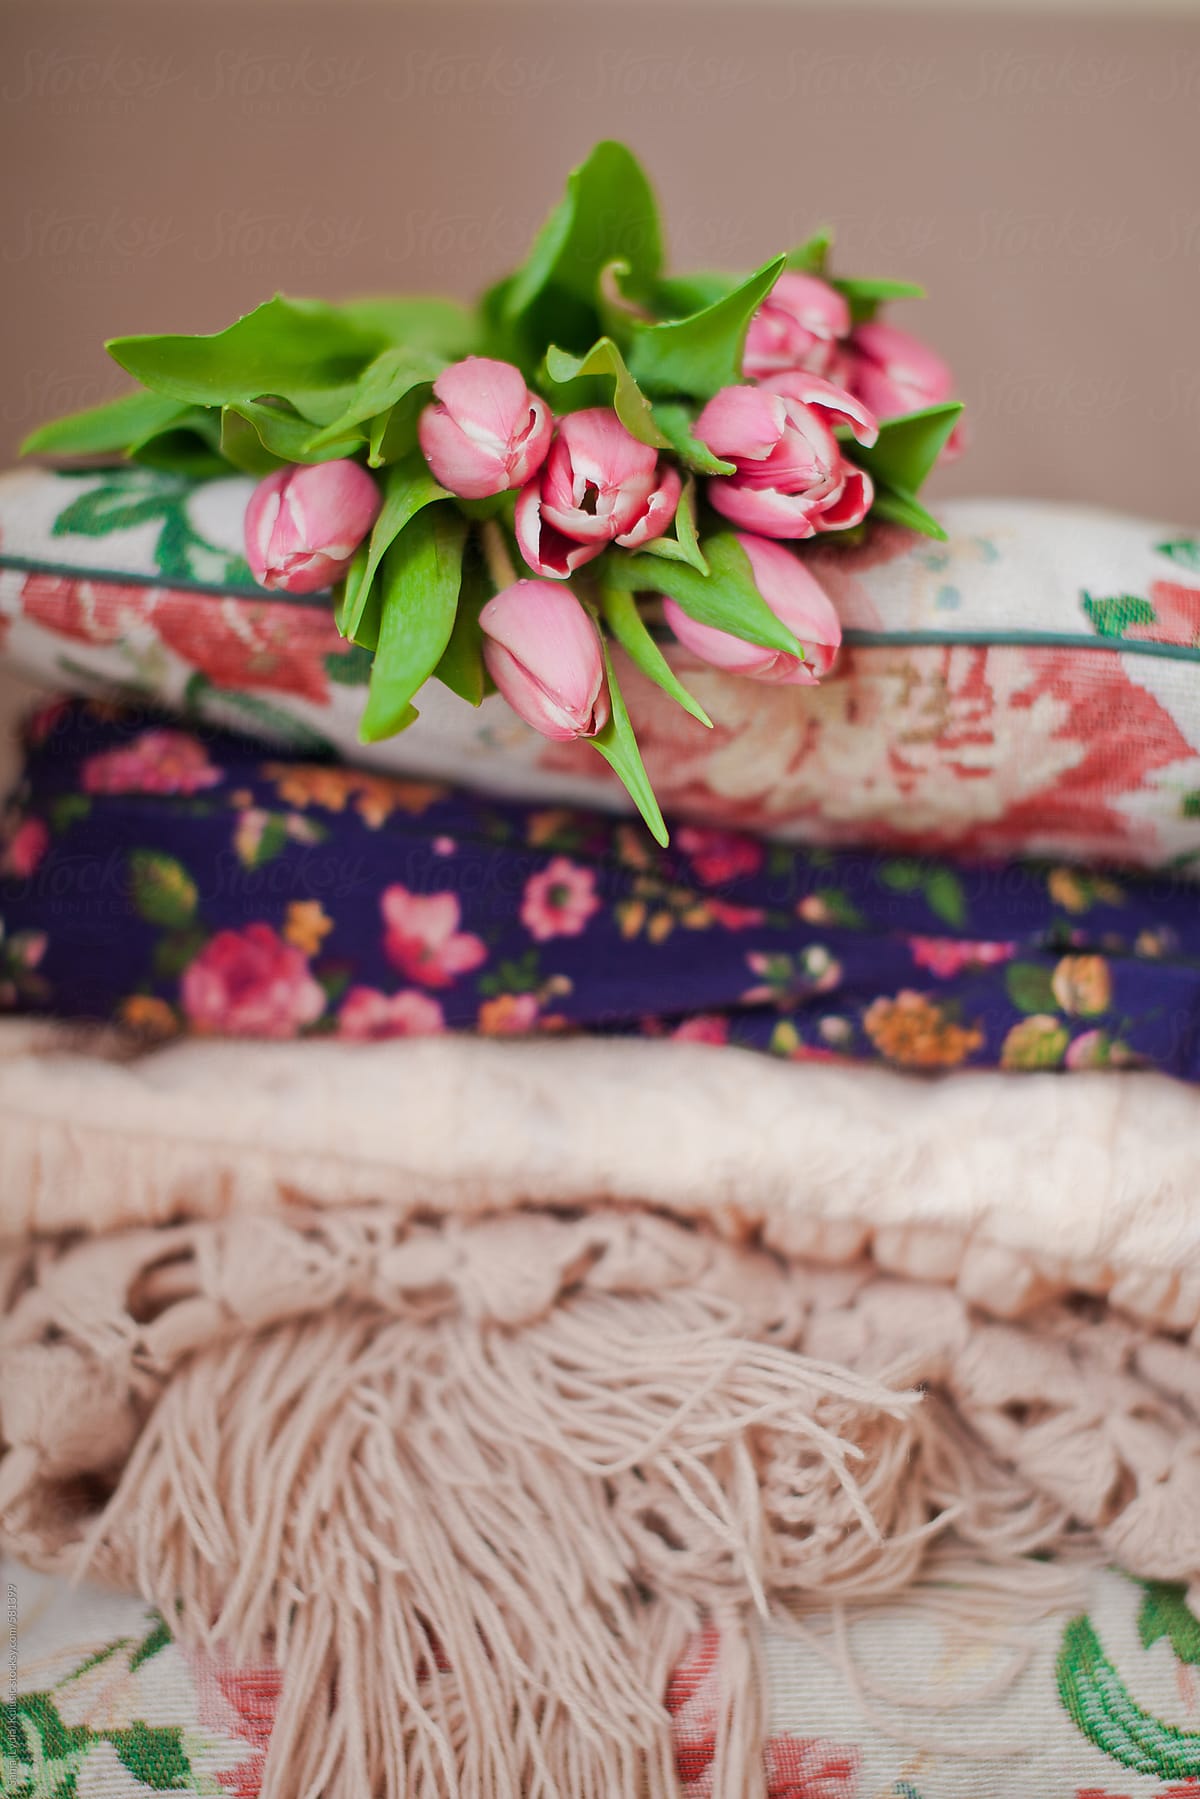 Pile of vintage floral print fabric with fresh cut tulips on top